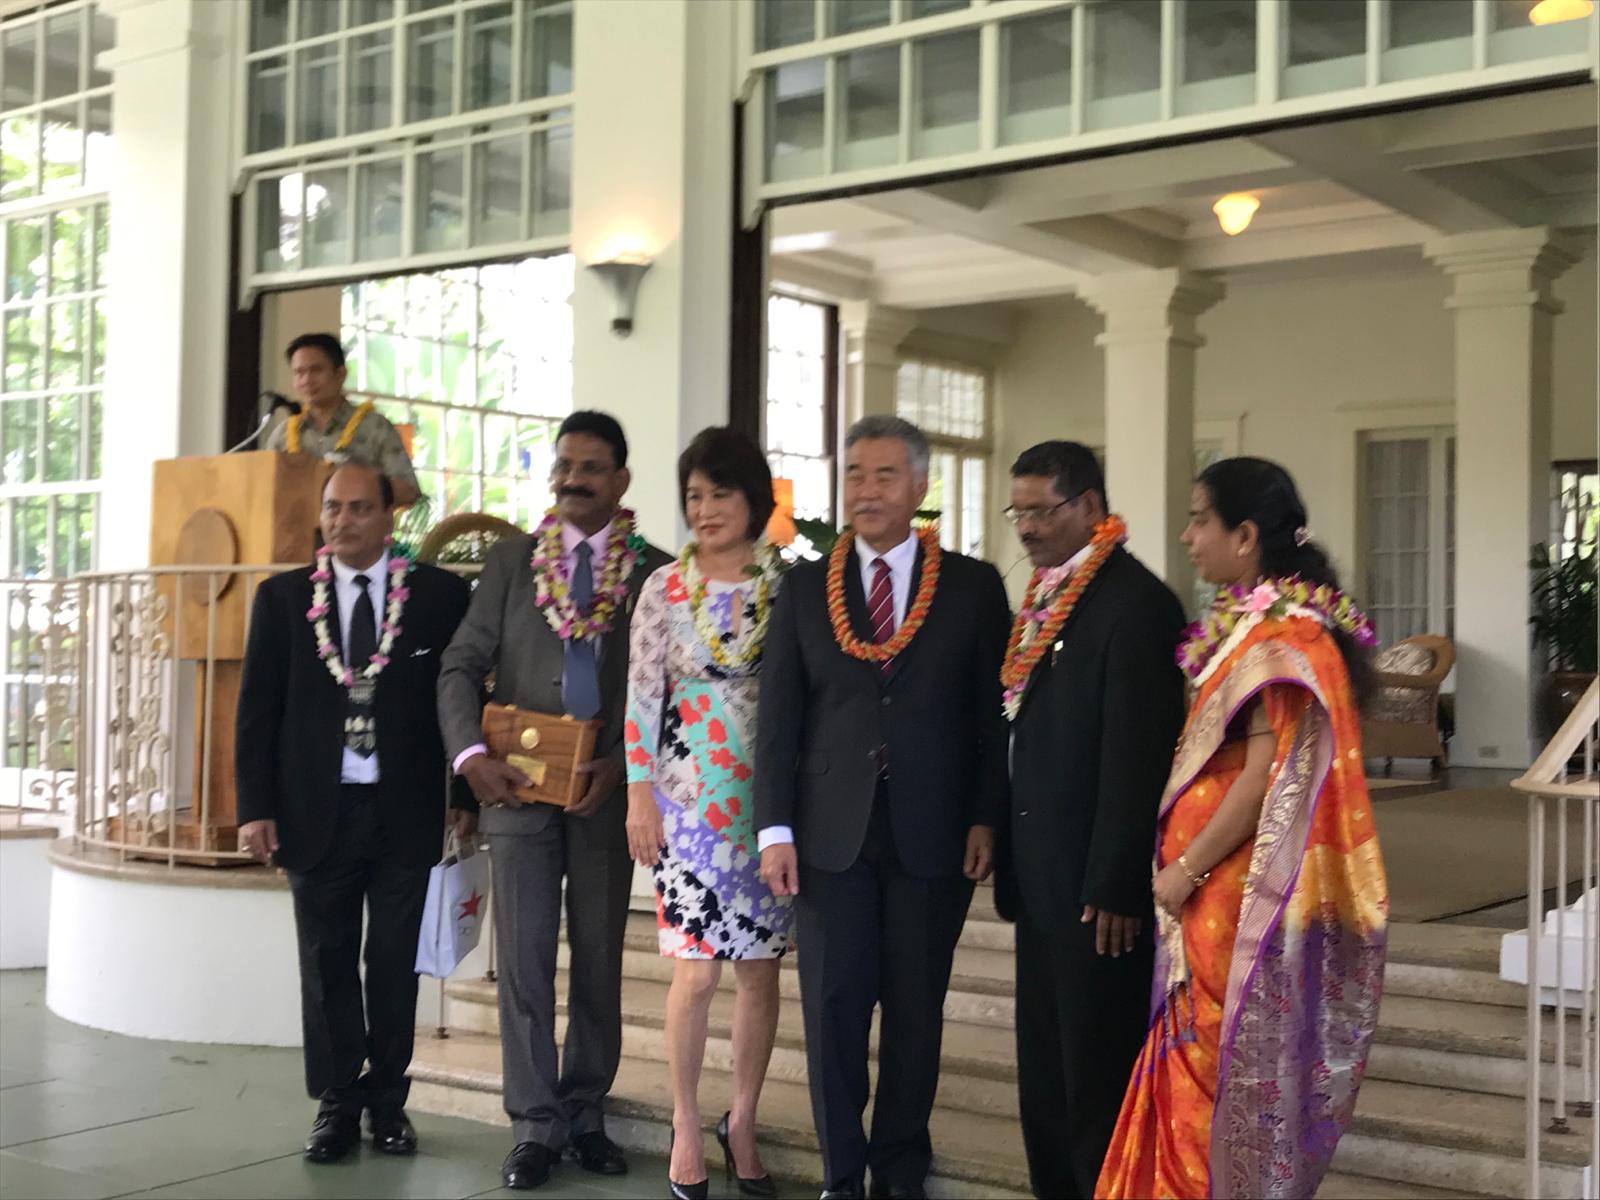 GIIP members attended the signing ceremony of Sister State Relationship between Hawaii and Goa, India and met with Hon. Governor, David Y. Ige and First Lady, Dawn Ige at Washington place in Honolulu in September 2018.